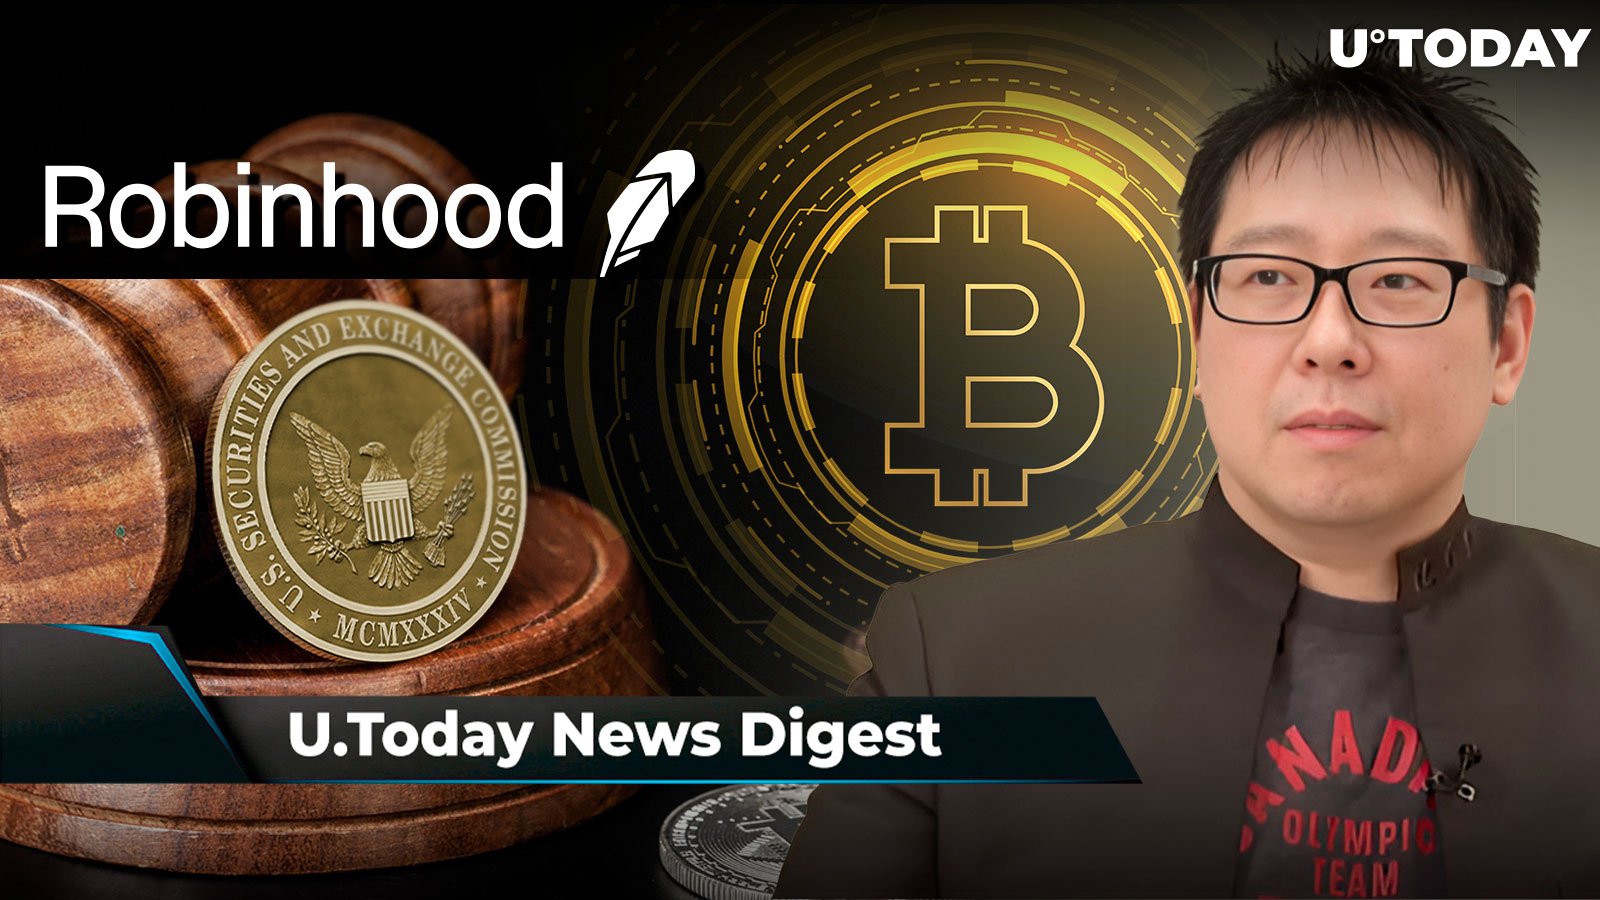 Robinhood CEO Issues Firm Response to SEC, Samson Mow Expects New BTC All-Time High Soon, SHIB Leader Shytoshi Kusama Shares Mysterious Breakthrough – U.Today's Crypto News Digest